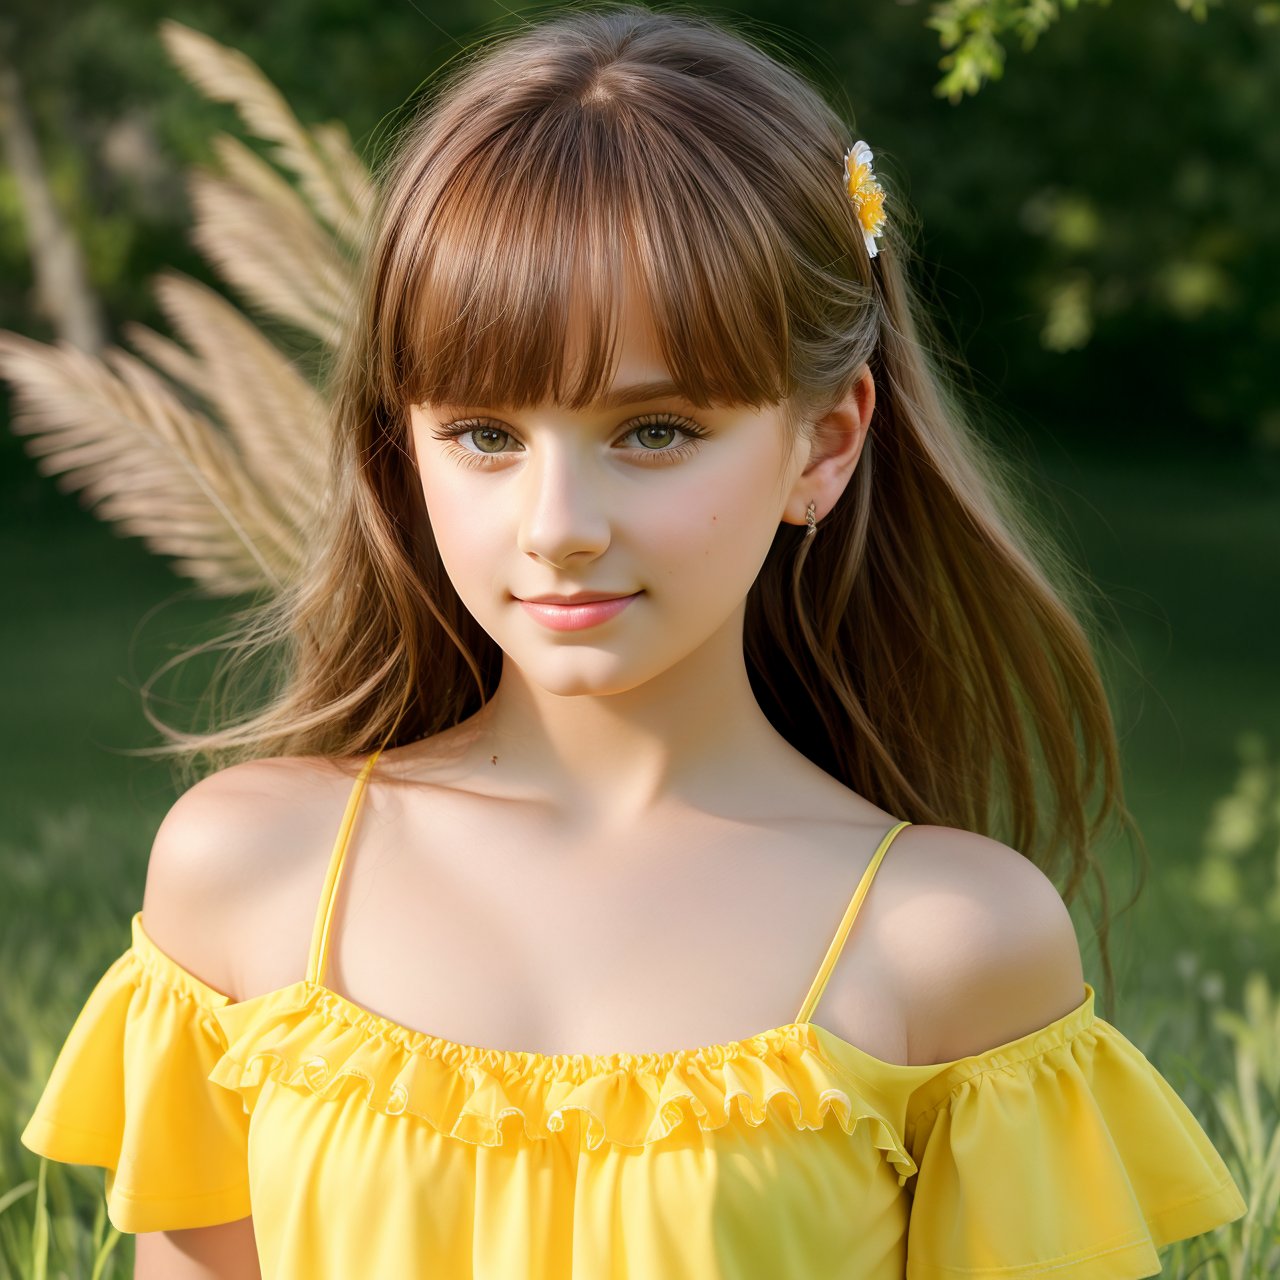 (masterpiece:1.3), best quality, extra resolution, wallpaper, looking at viewer, full body portrait of stunning (AIDA_LoRA_KtM:1.03) <lora:AIDA_LoRA_KtM:0.92> as little girl wearing a yellow shirt in the field with trees on the backgrounds, outdoors, pretty face, naughty, funny, happy, playful, intimate, flirting with camera, dramatic, hyper realistic, studio photo, studio photo, kkw-ph1, hdr, f1.7, getty images, (colorful:1.1)